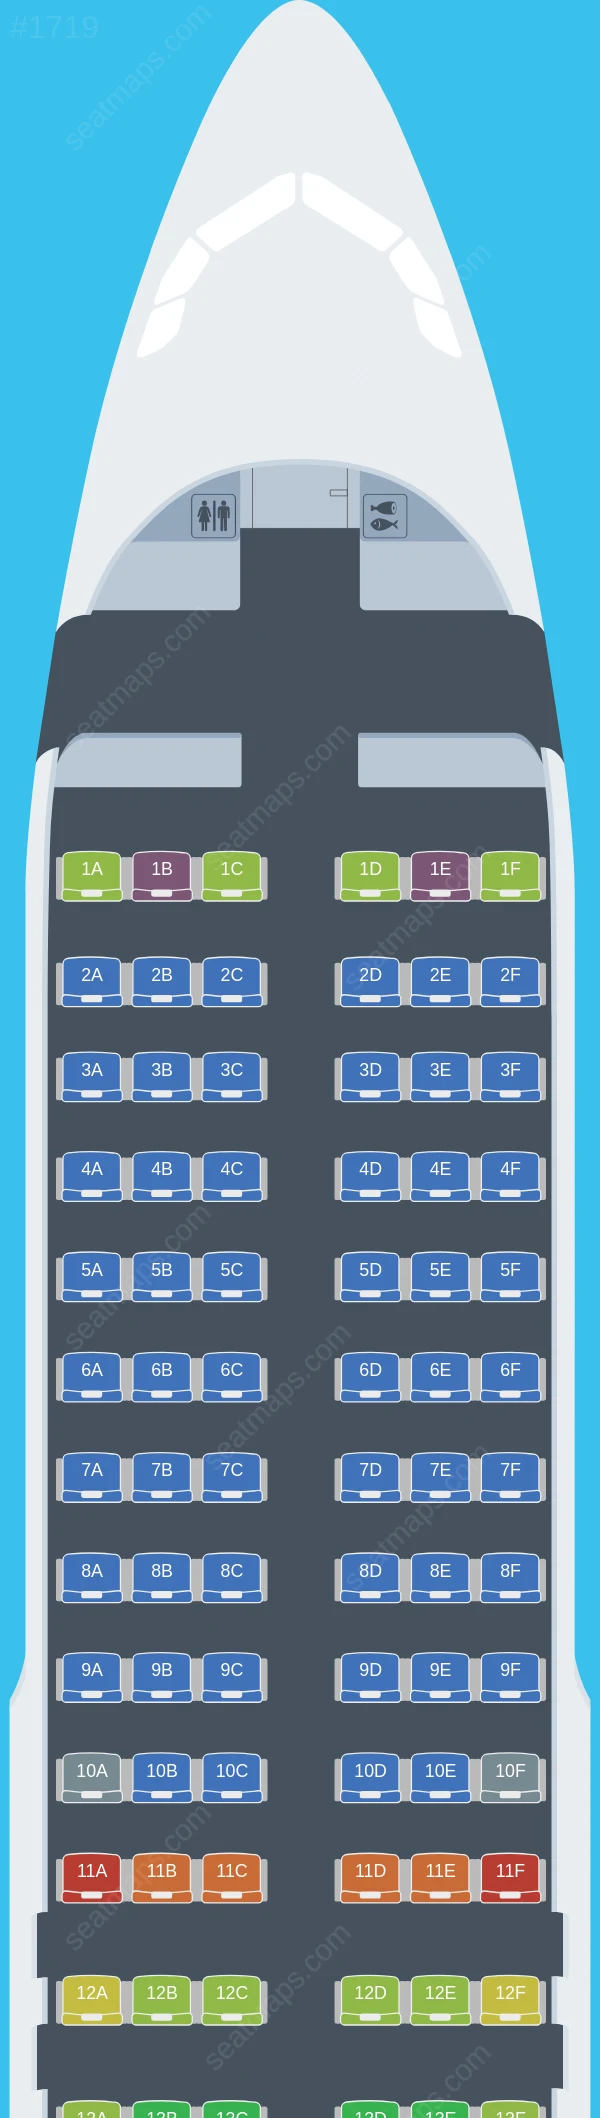 Aer Lingus Limited Airbus A320-200 seatmap preview